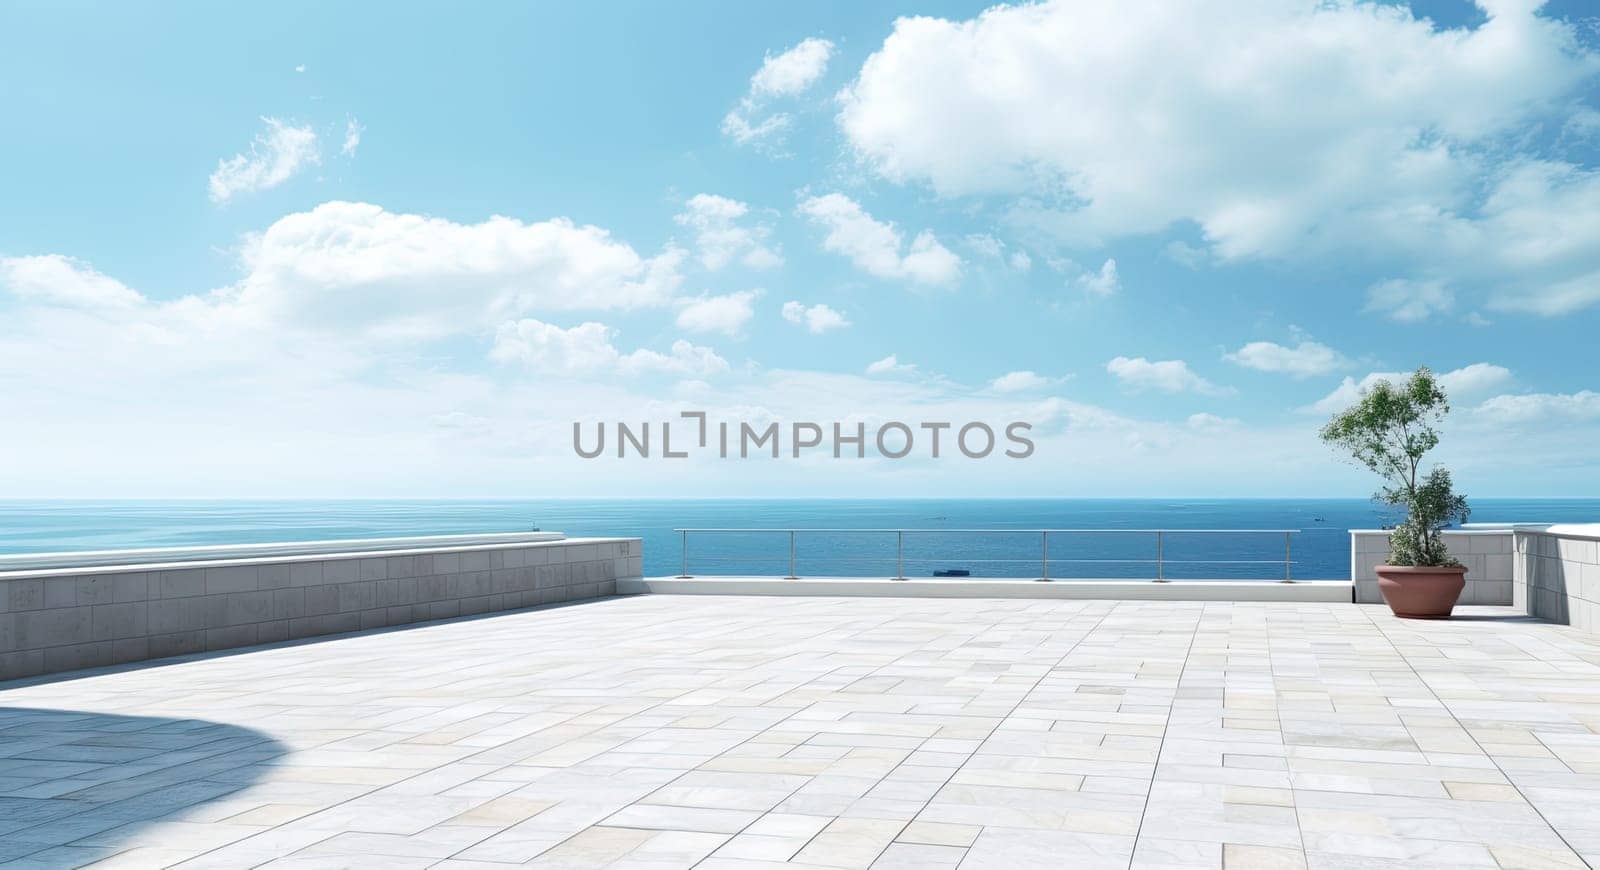 Concrete floor of the promenade and sea views. Beautiful background